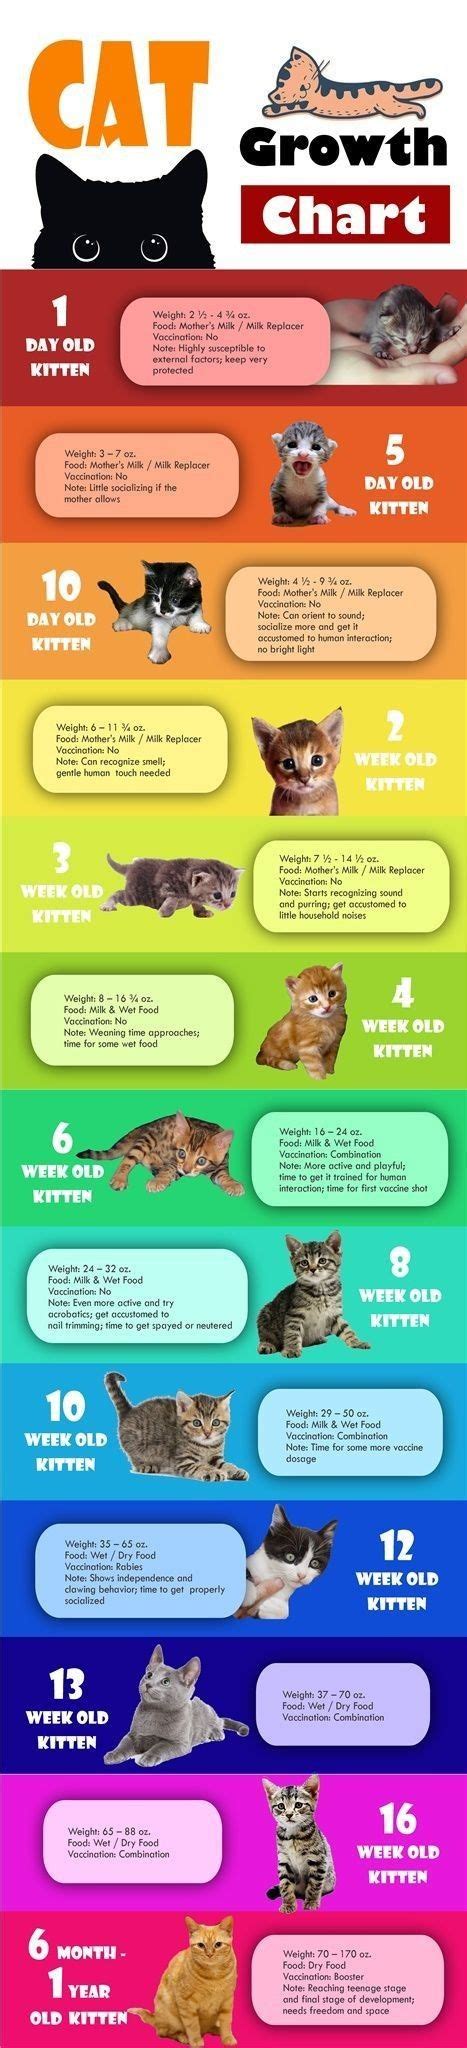 Kitten Growth And Development Cat Infographic Kitten Care Cats And